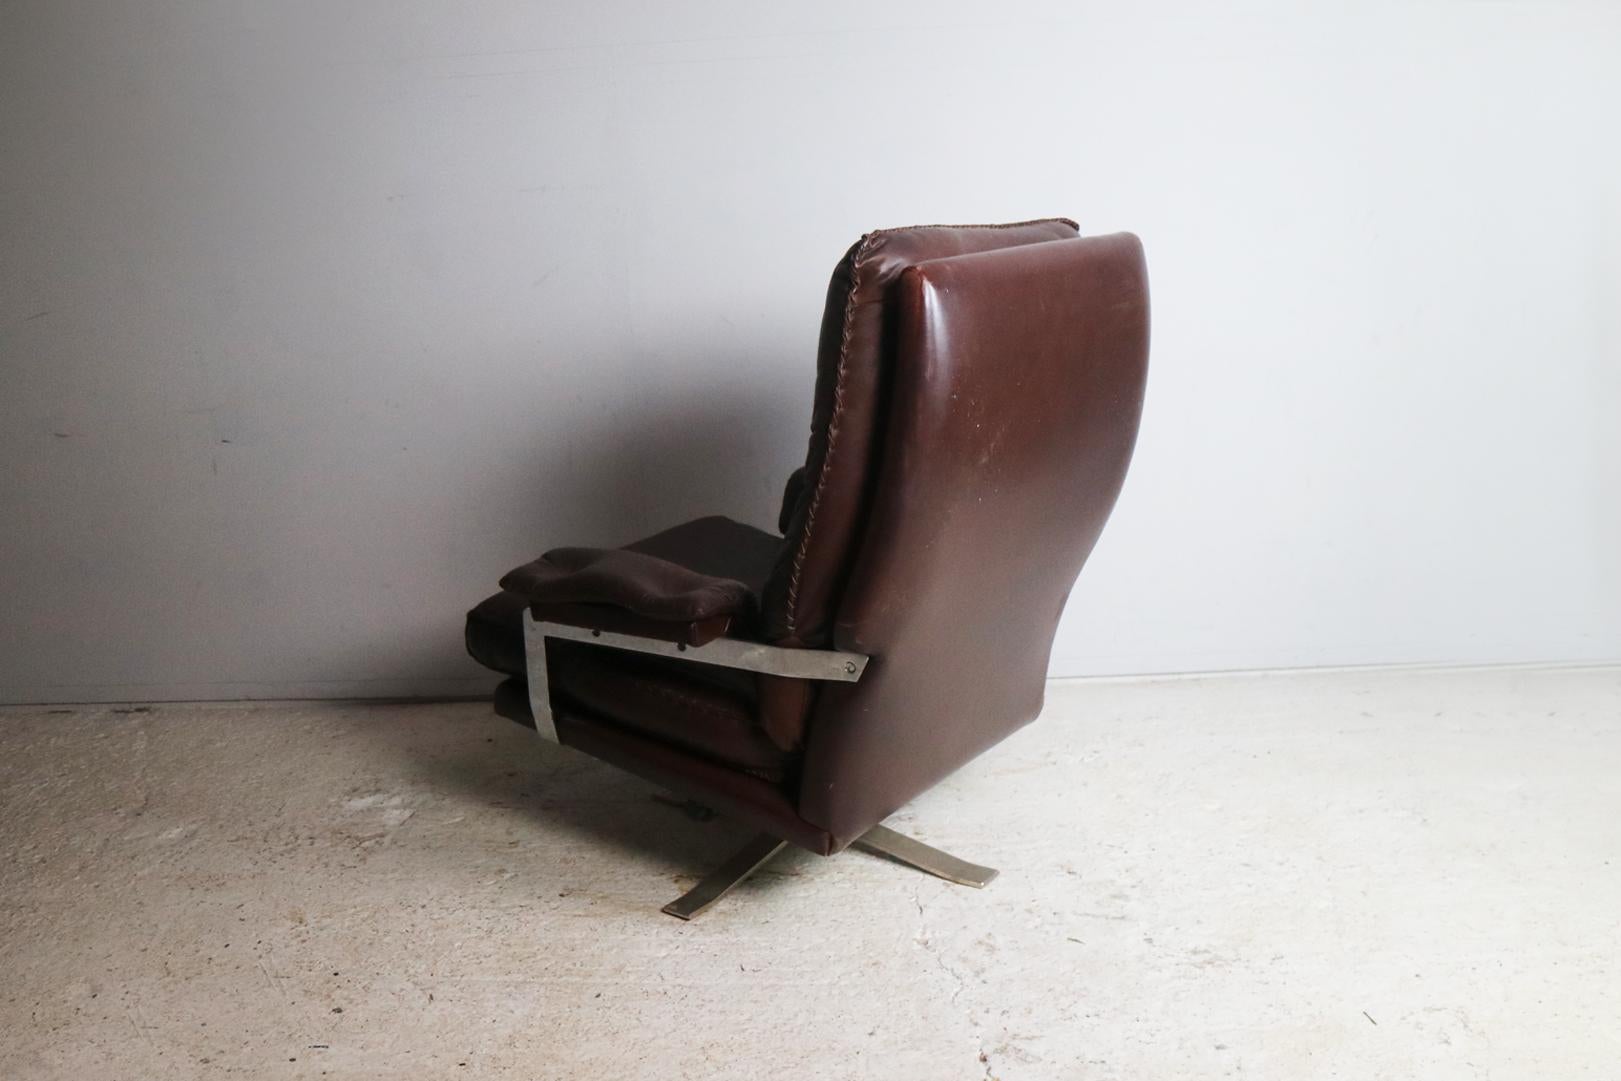 Plated 1970s Danish Midcentury Leather Reclining Lounge Chair For Sale